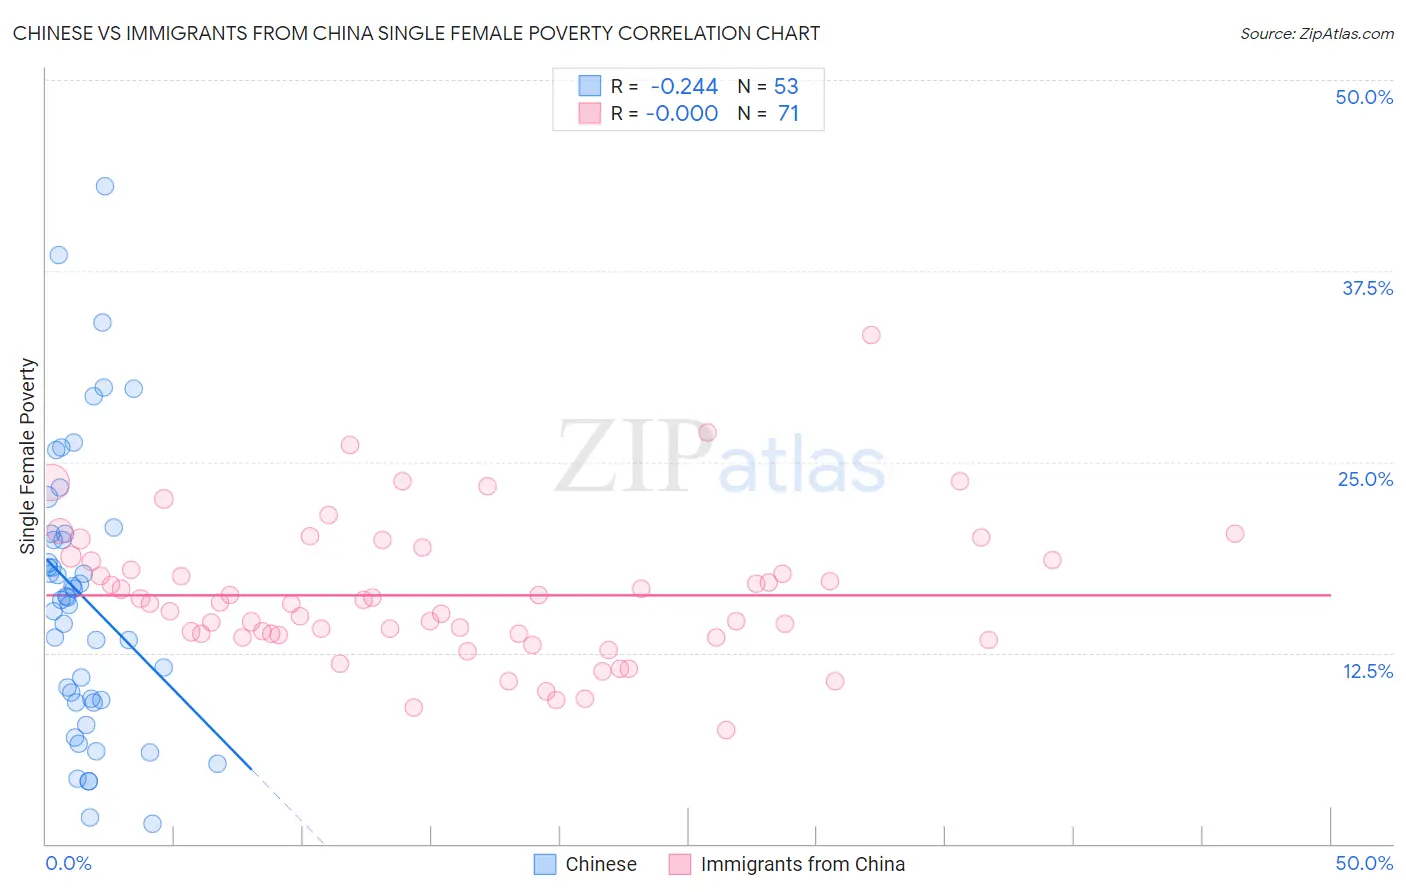 Chinese vs Immigrants from China Single Female Poverty